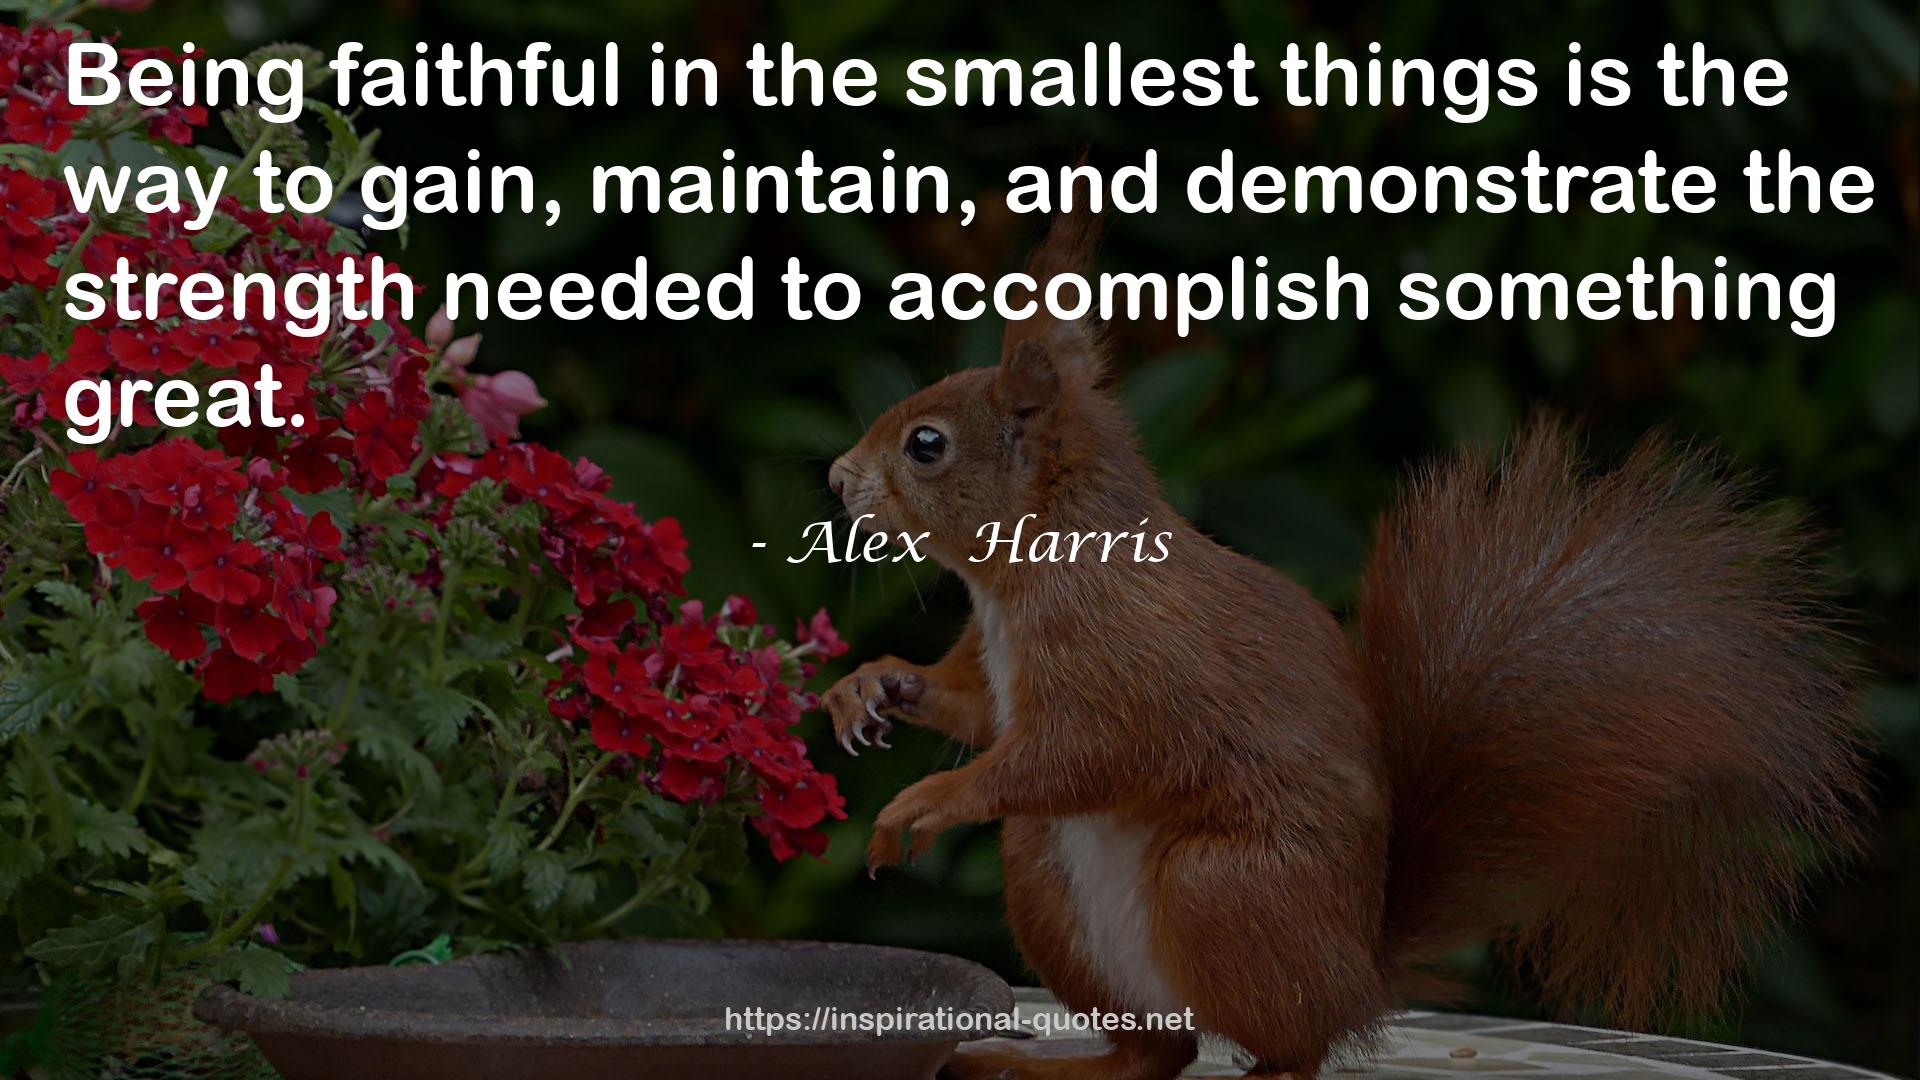 the smallest things  QUOTES